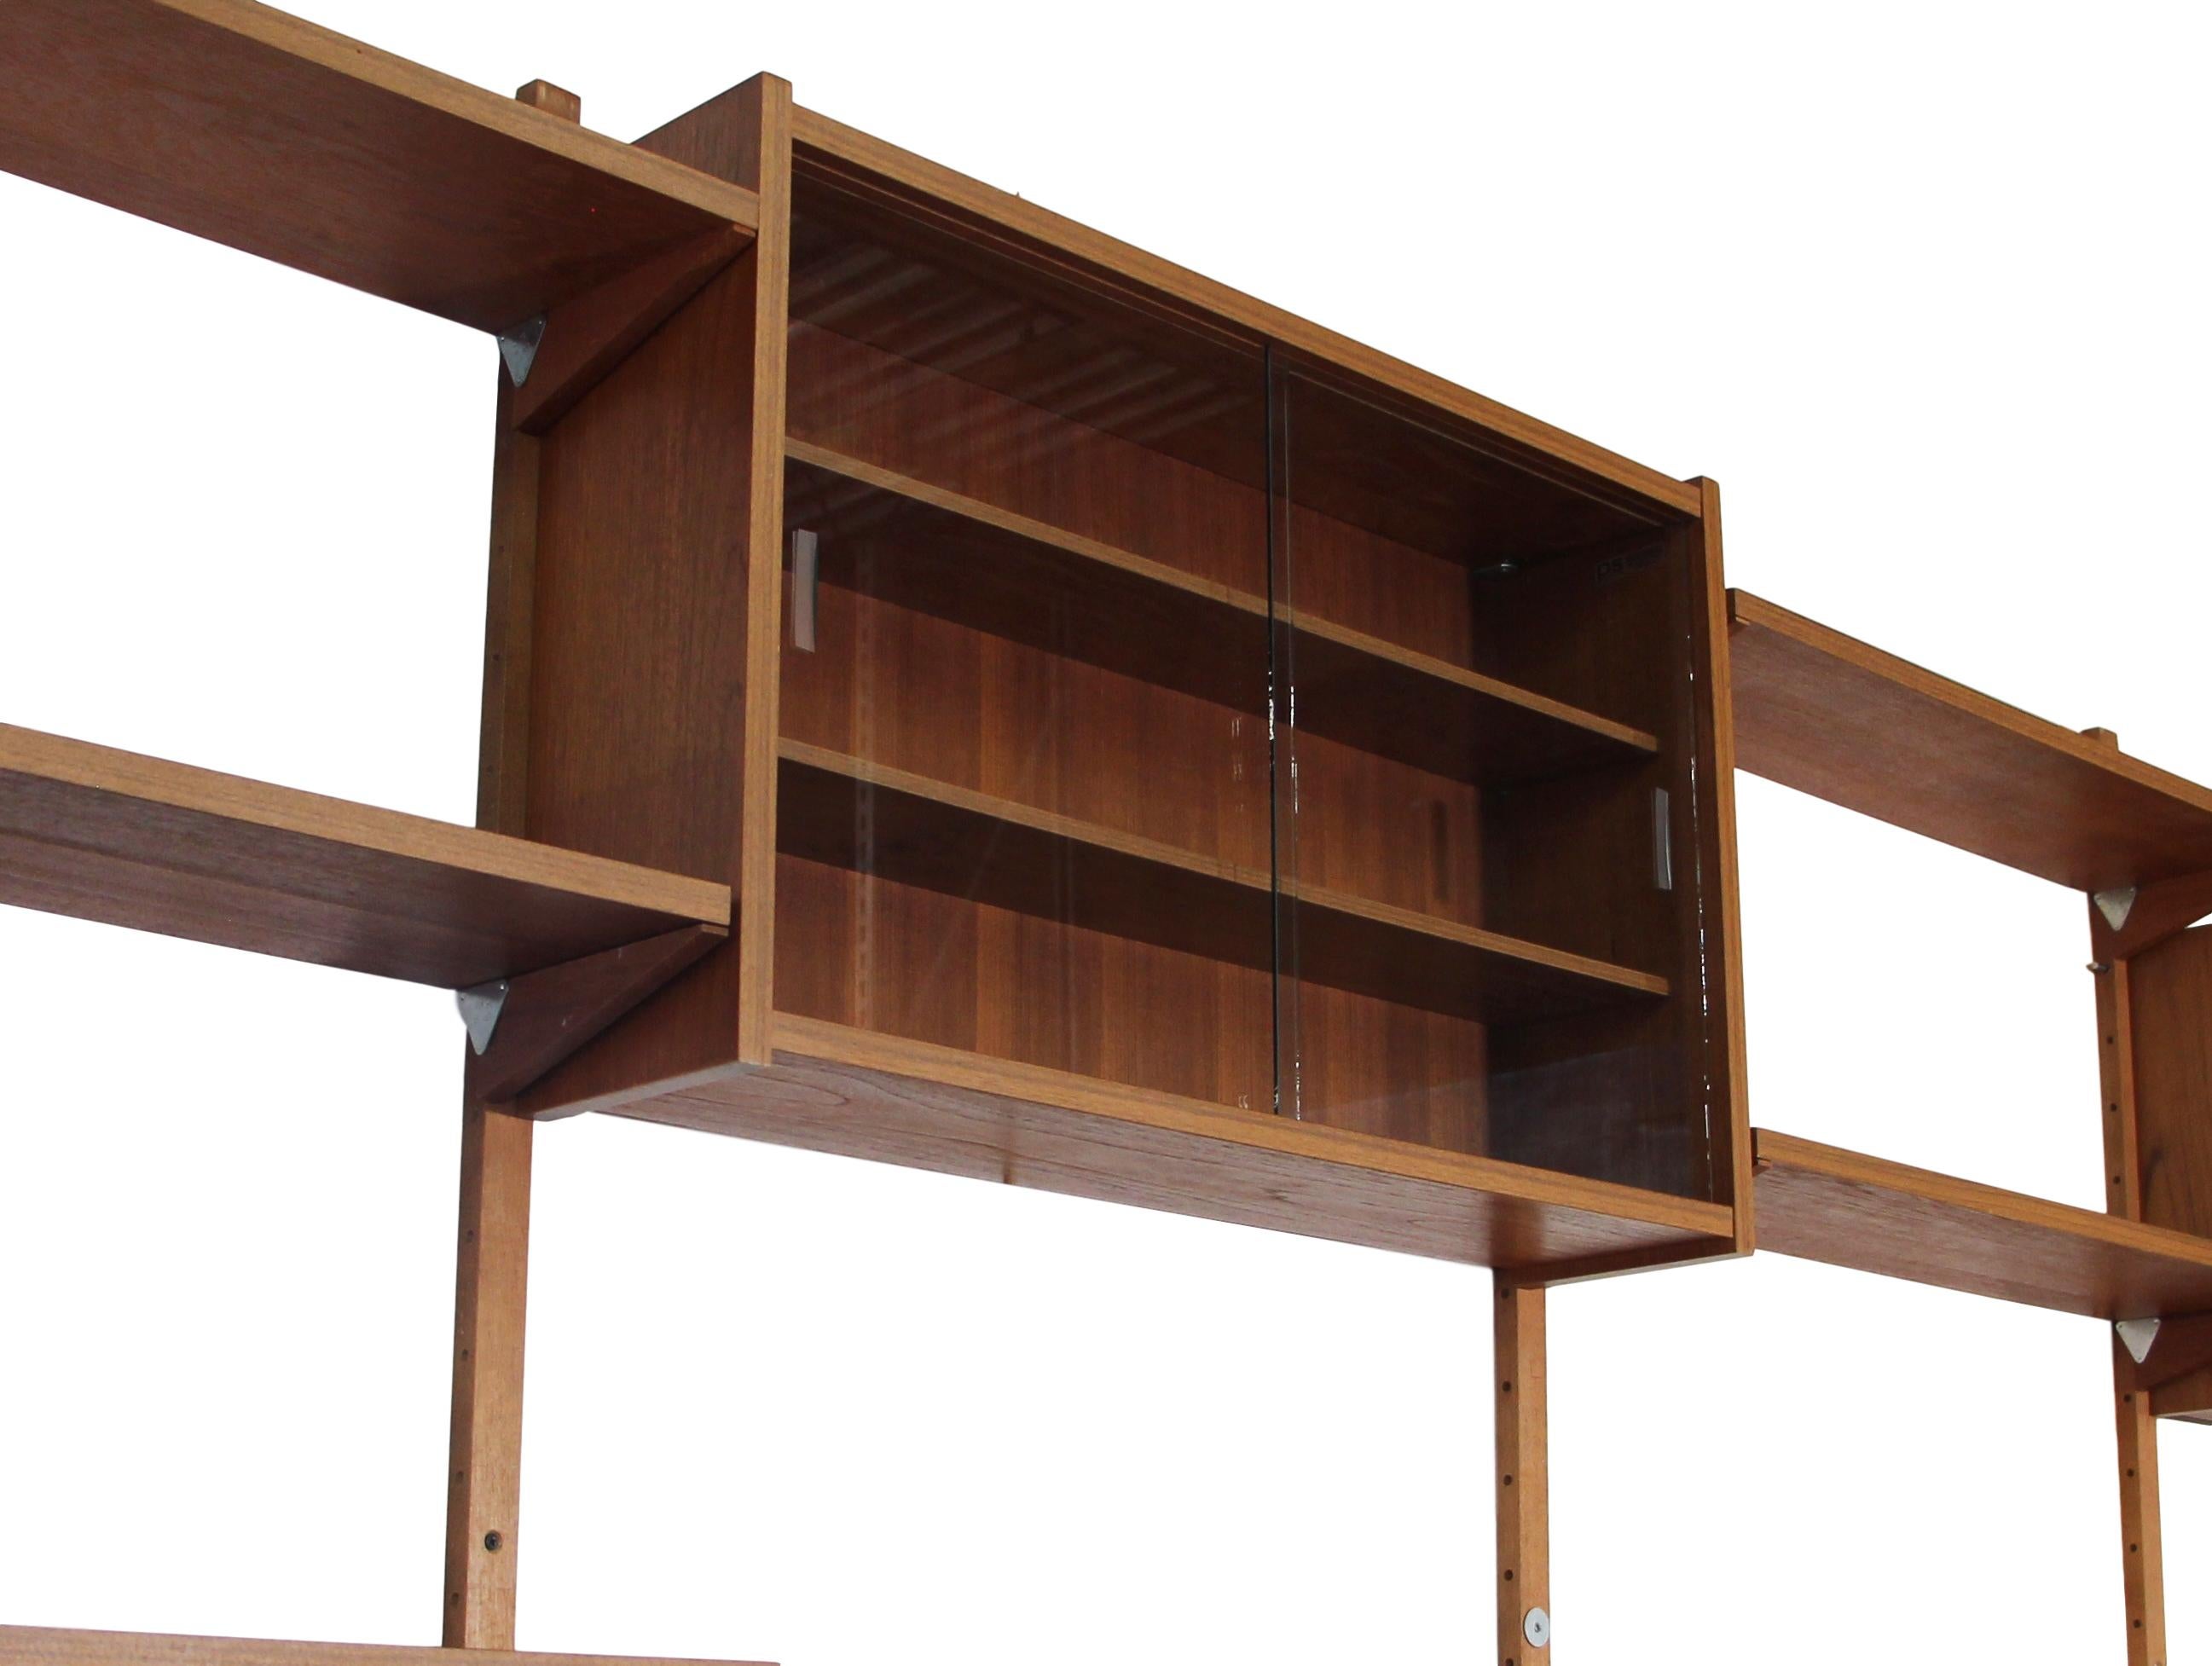 This is a stunning midcentury 7 bay teak shelving unit by PS System. Made in Denmark. Similar to Cadovius units.

It is a modular unit. You can arrange it in many different ways.

It consists of 2 upper glass sliding door cabinet, 1 open slotted